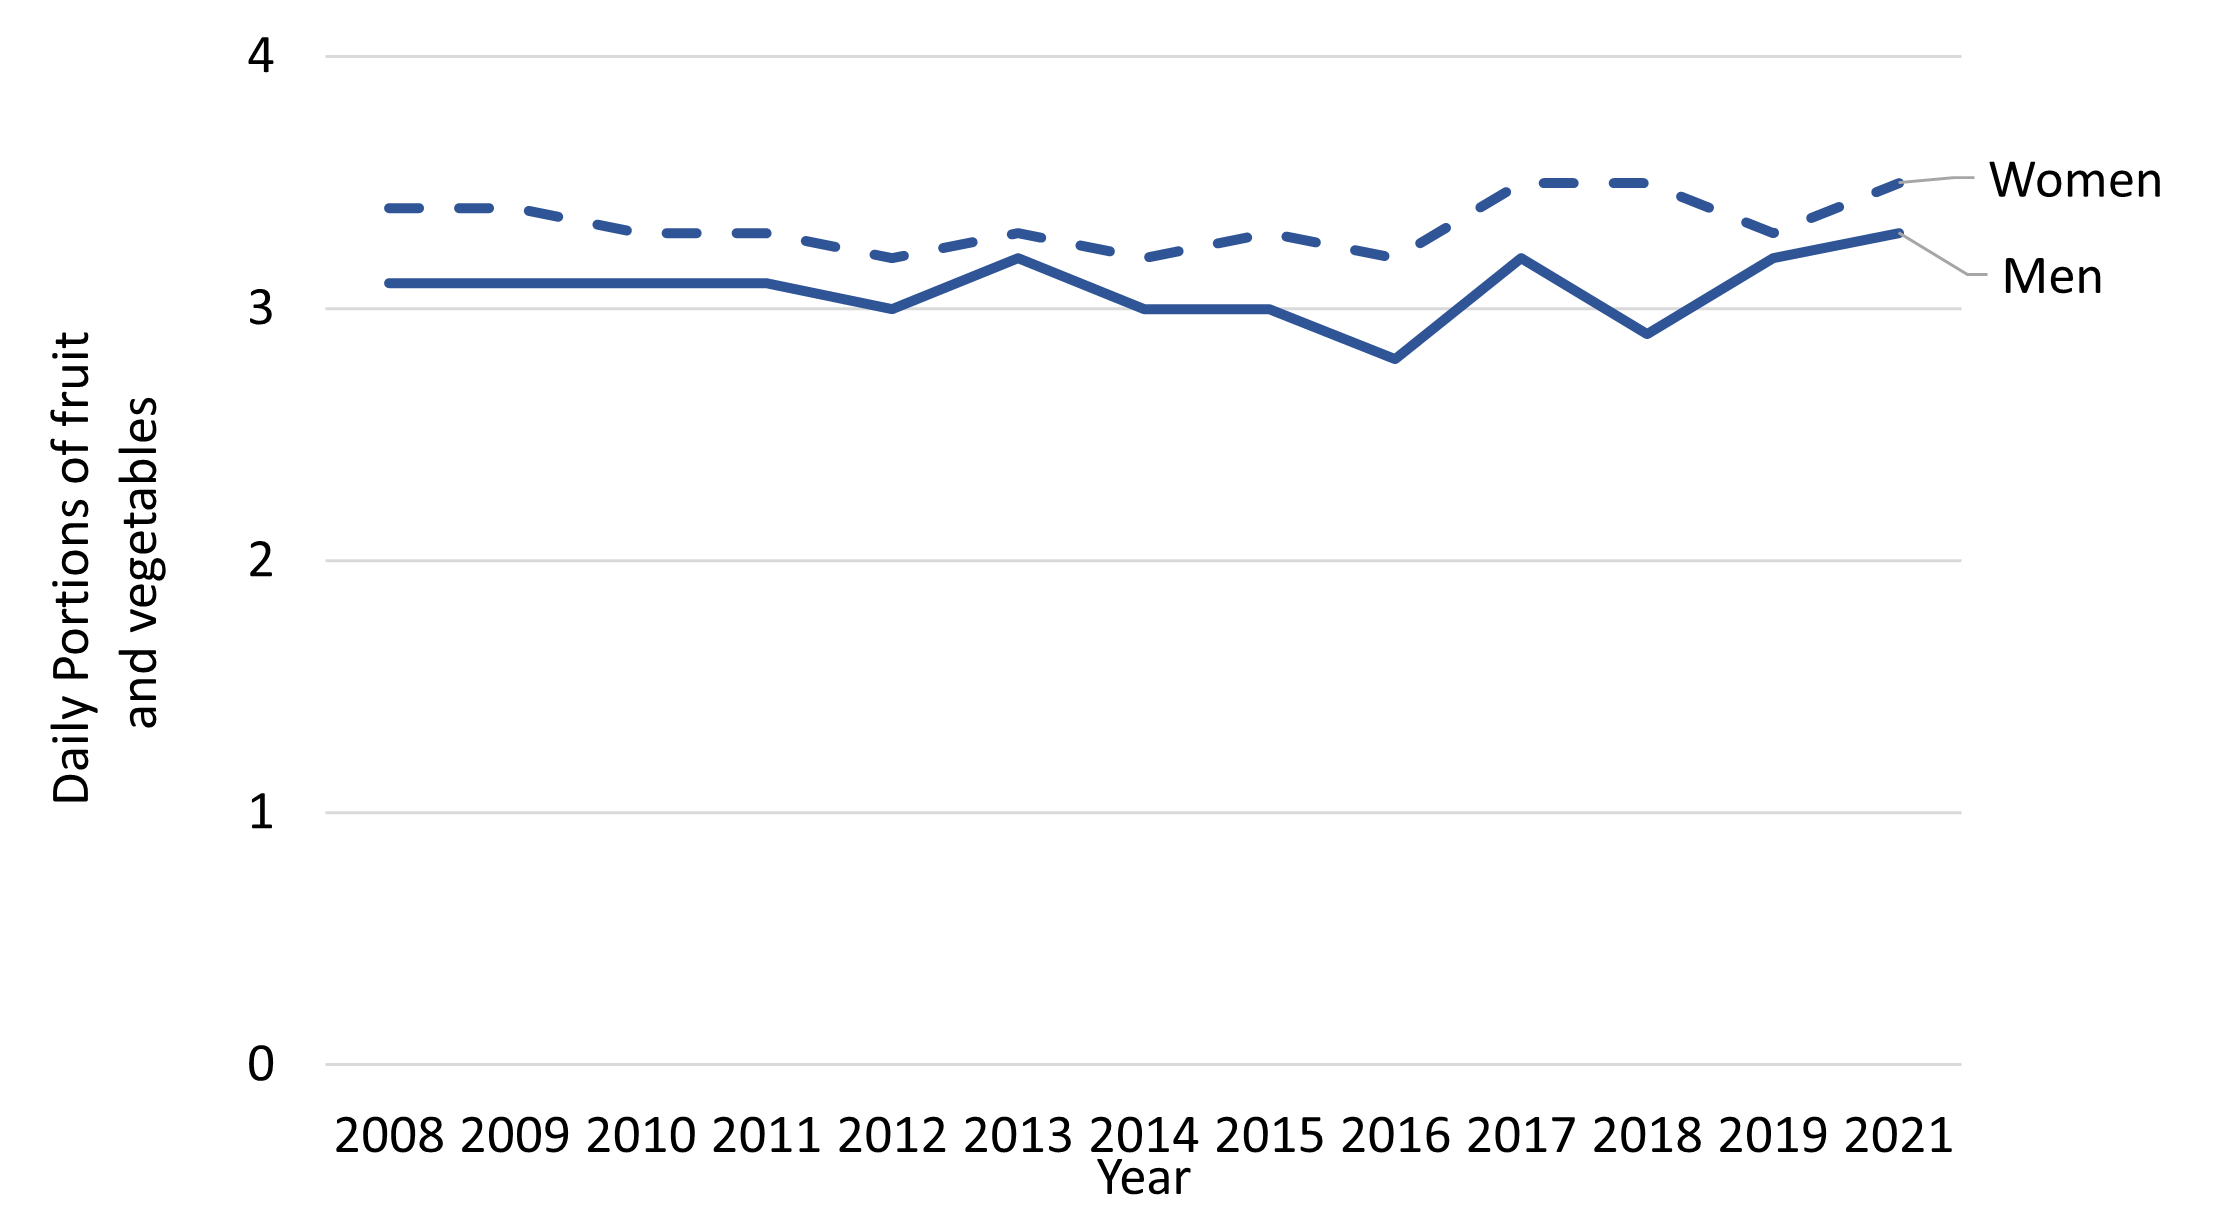 There has been a fairly stable trend in daily fruit and vegetable consumption for both men and women between 2008 and 2021. Women consumed between 3.2 and 3.5 pieces per day across the period, slightly higher than men, who consumed between 2.9 and 3.5 pieces per day. In 2021 men consumed more fruit and vegetables  on average than women with 3.5 and  3.3 pieces of fruit and vegetables respectively.